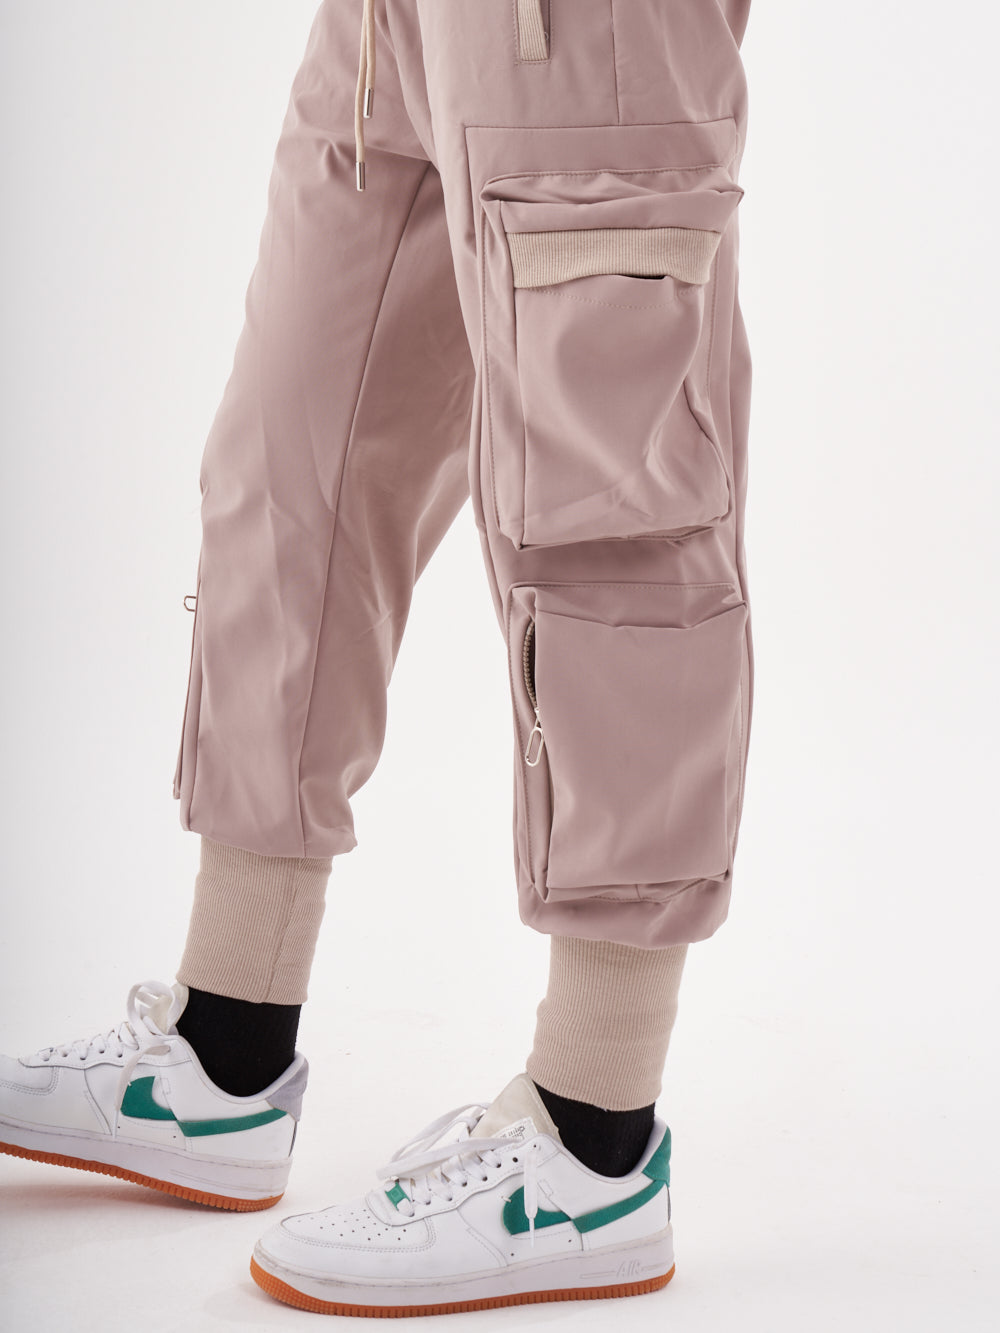 A man wearing OUTLIER | MAUVE cargo pants and white sneakers.